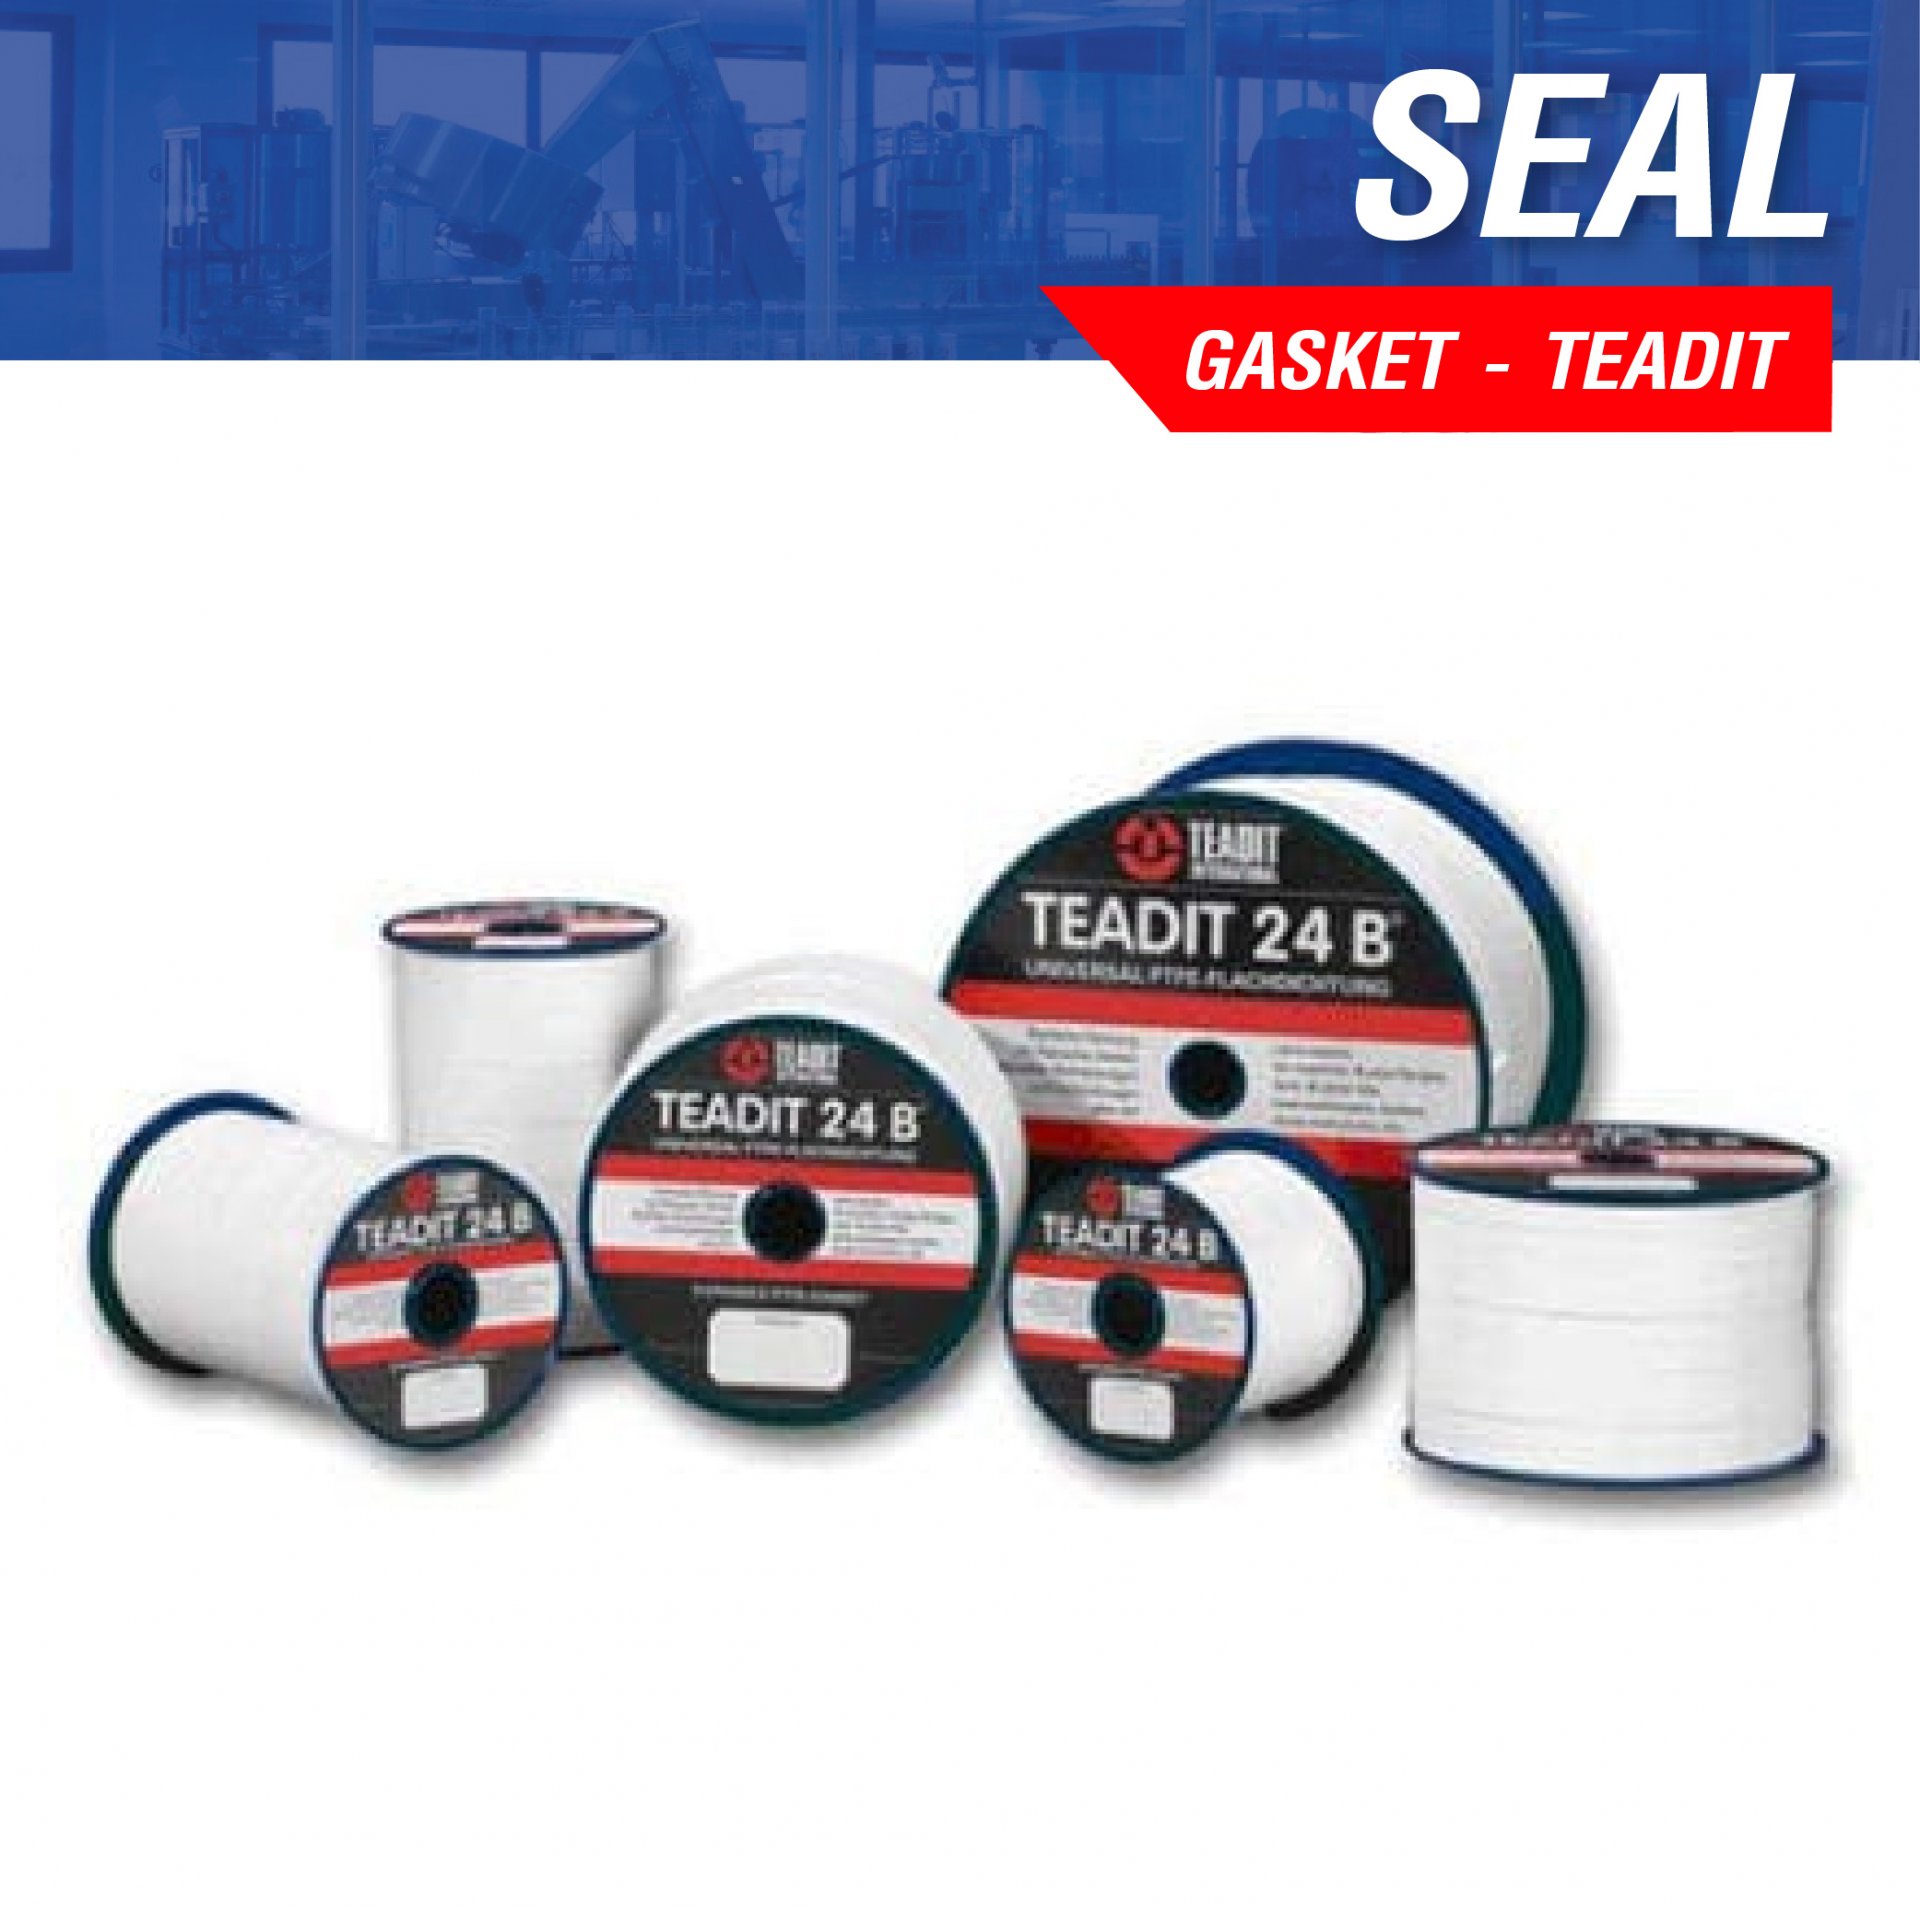 ePTFE  JOINT – SEALANT  TAPES